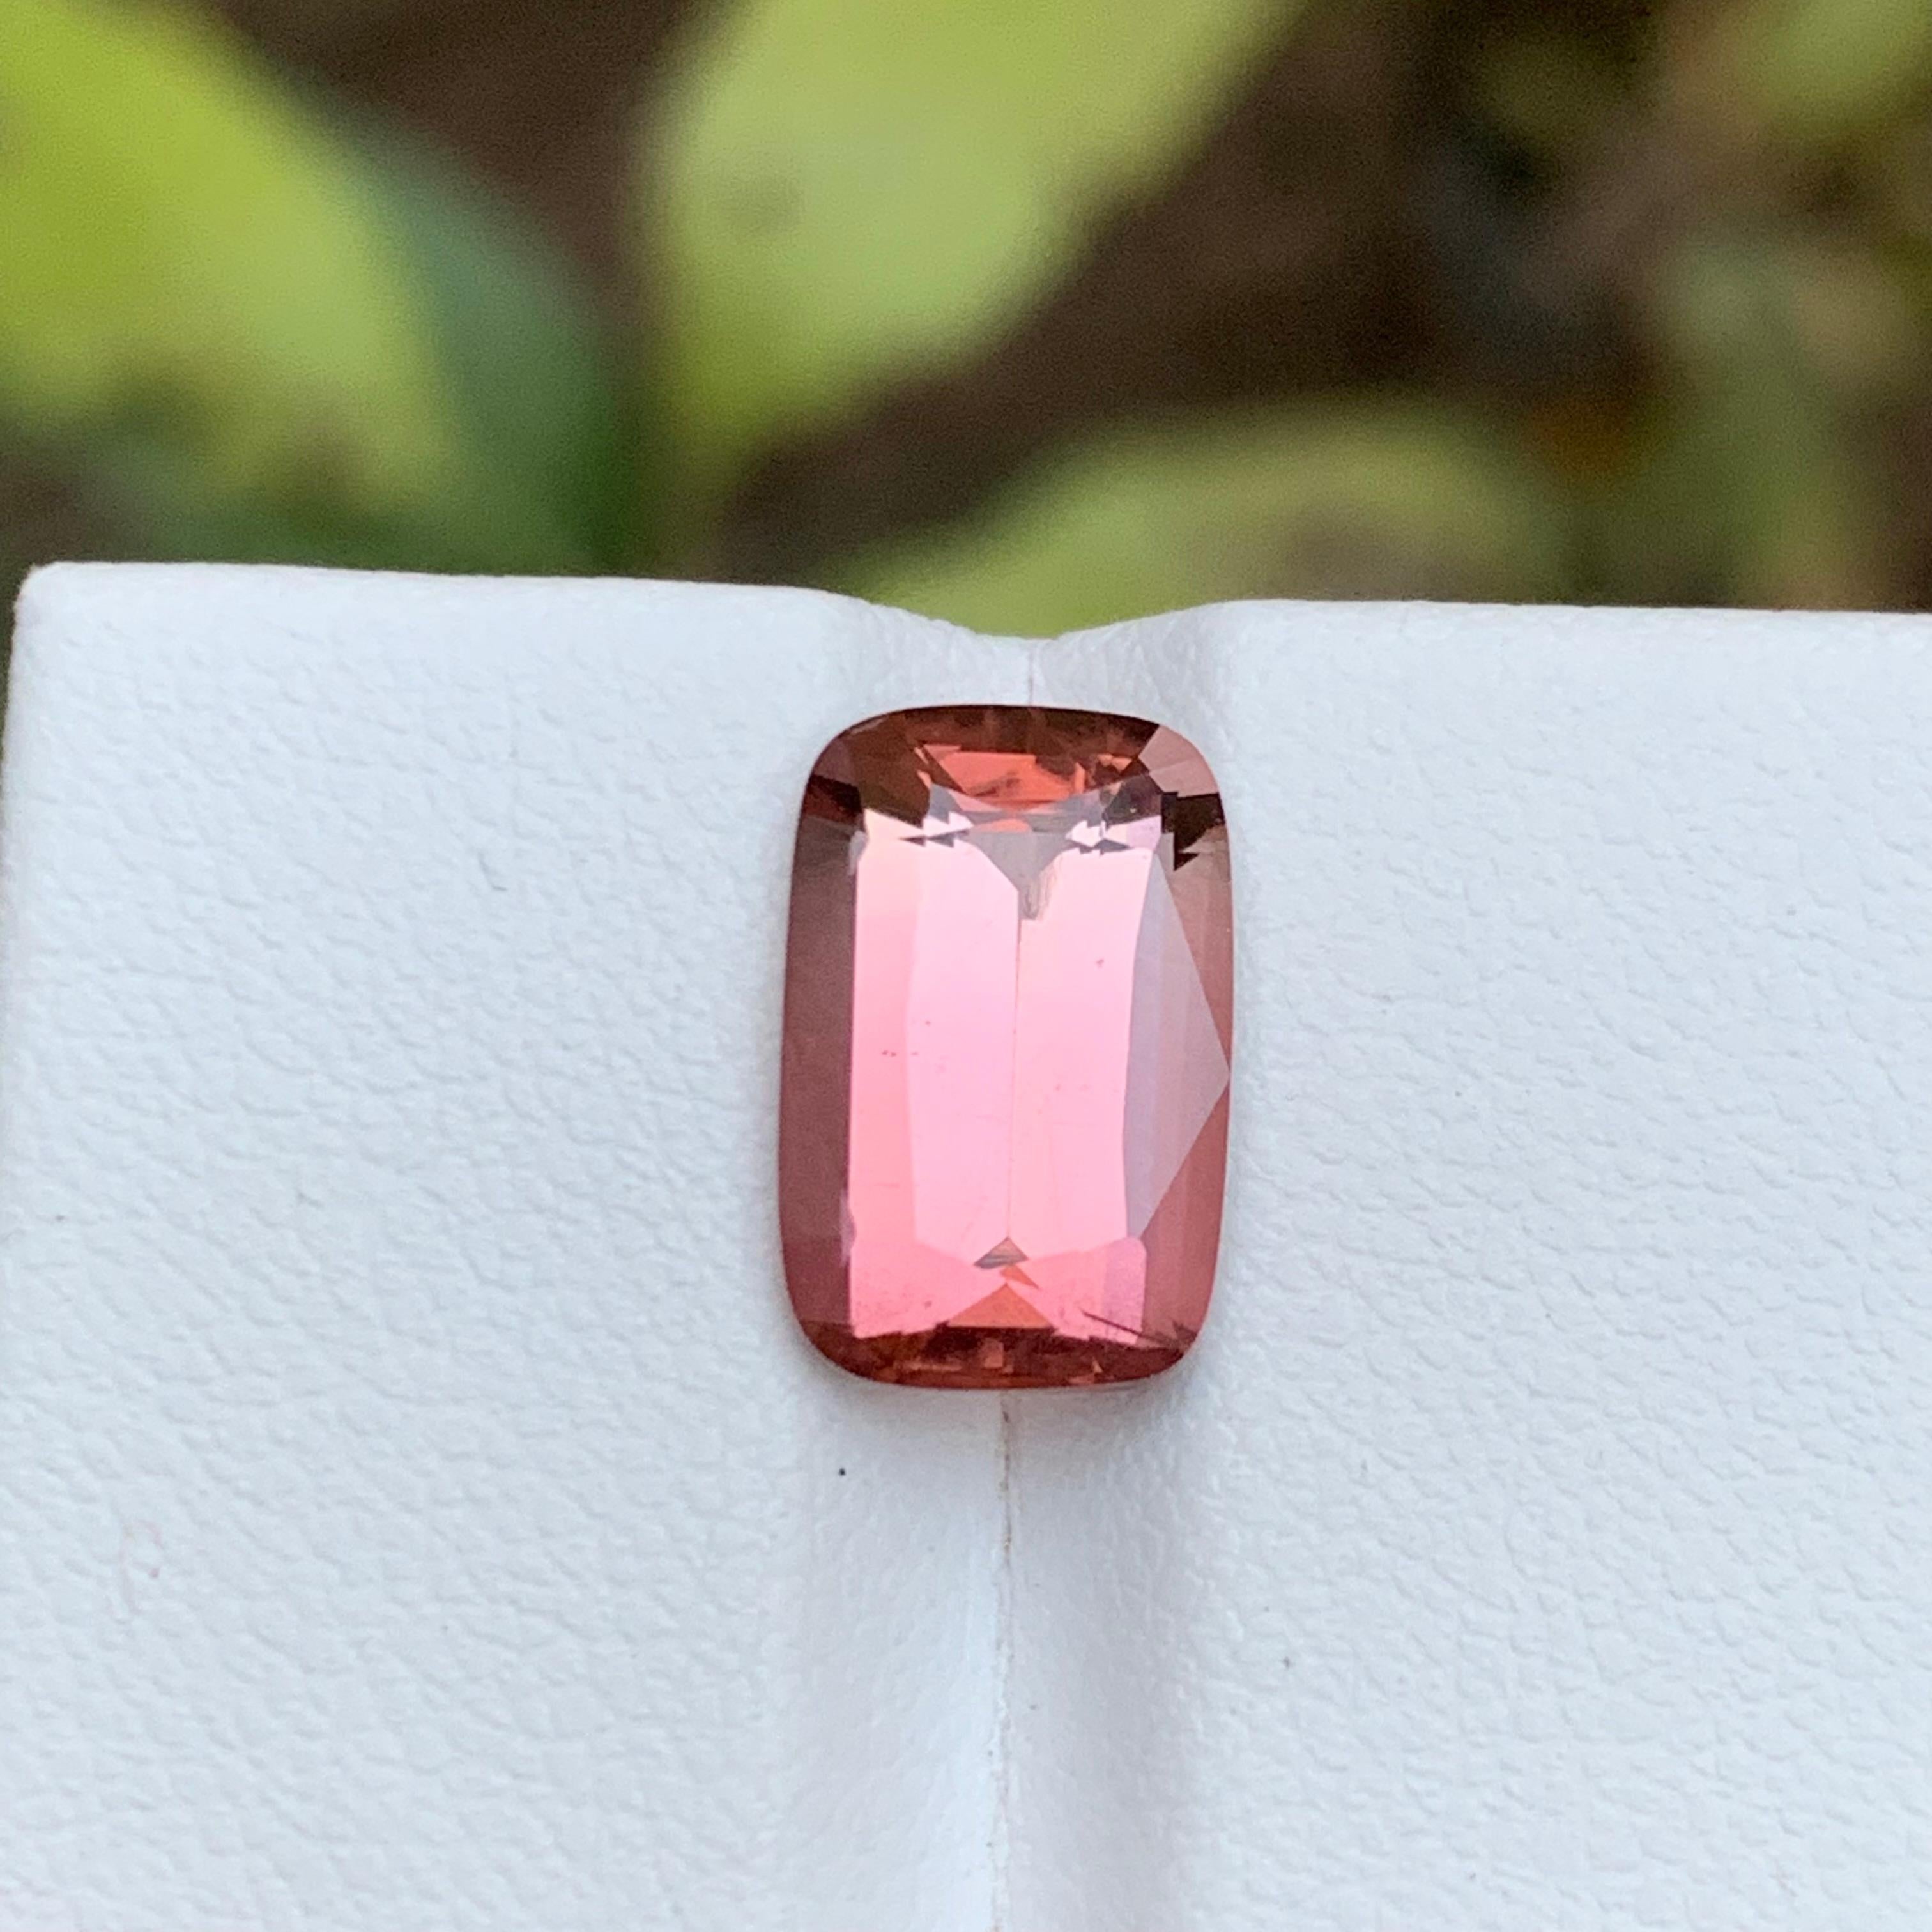 Rare Pink Natural Tourmaline Gemstone 4Ct Brilliant Cushion Cut for Ring/Pendant For Sale 8